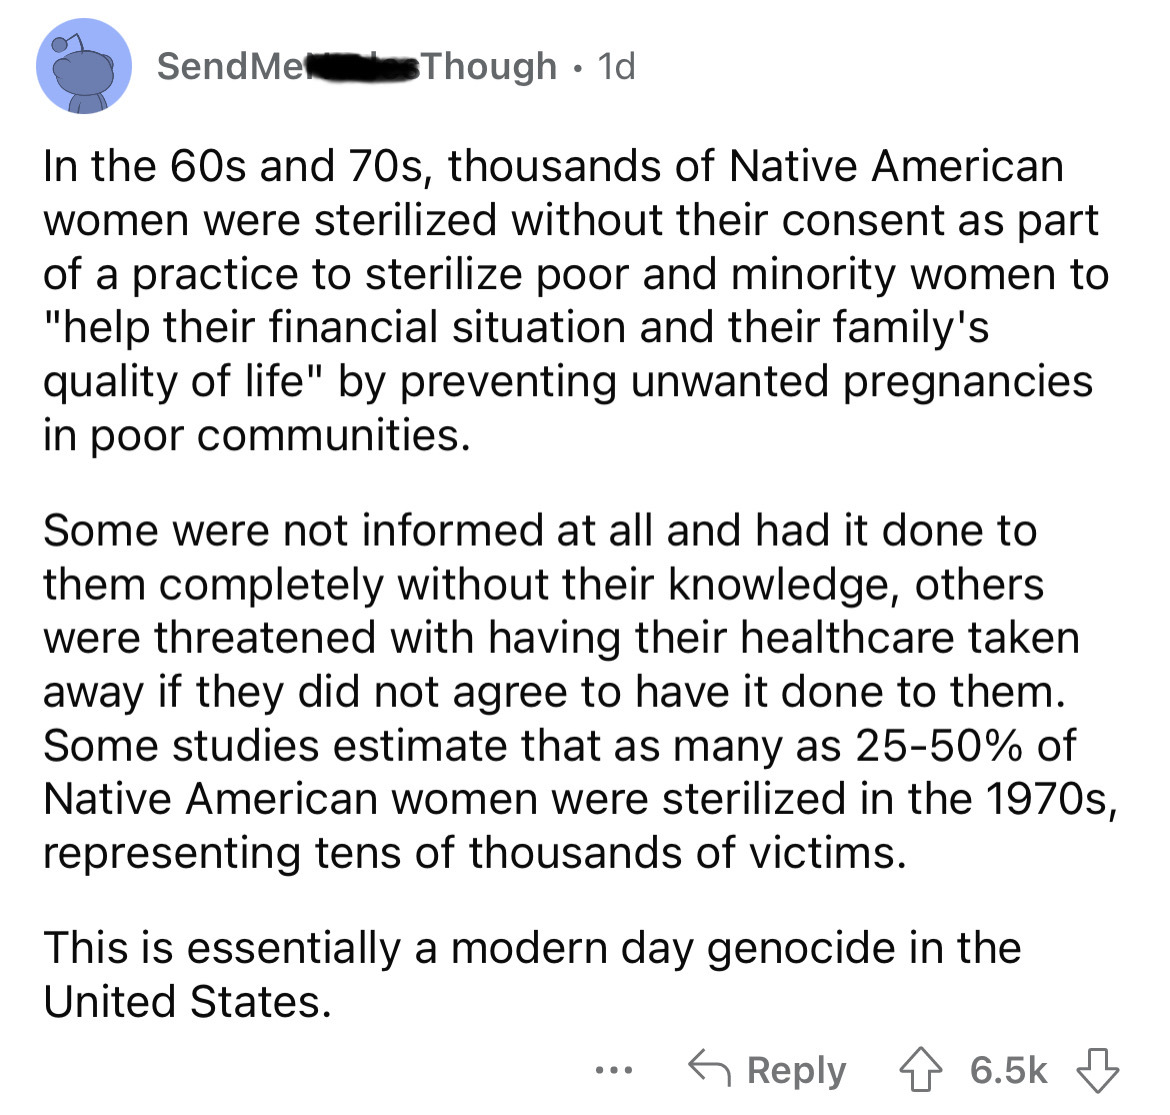 angle - SendMe Though 1d In the 60s and 70s, thousands of Native American women were sterilized without their consent as part of a practice to sterilize poor and minority women to "help their financial situation and their family's quality of life" by prev